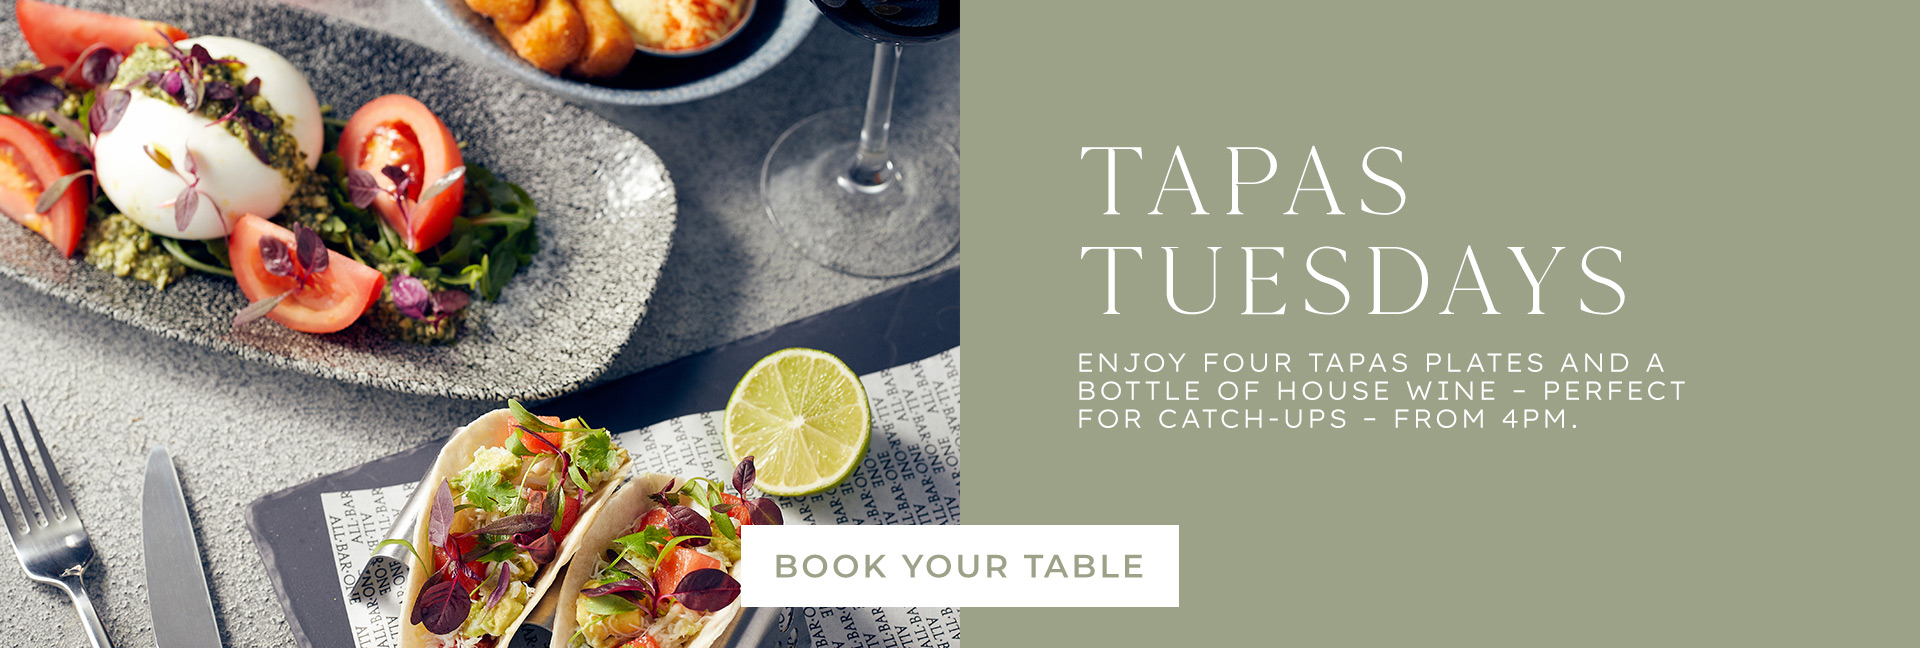 Tapas Tuesday at All Bar One Liverpool - Book now